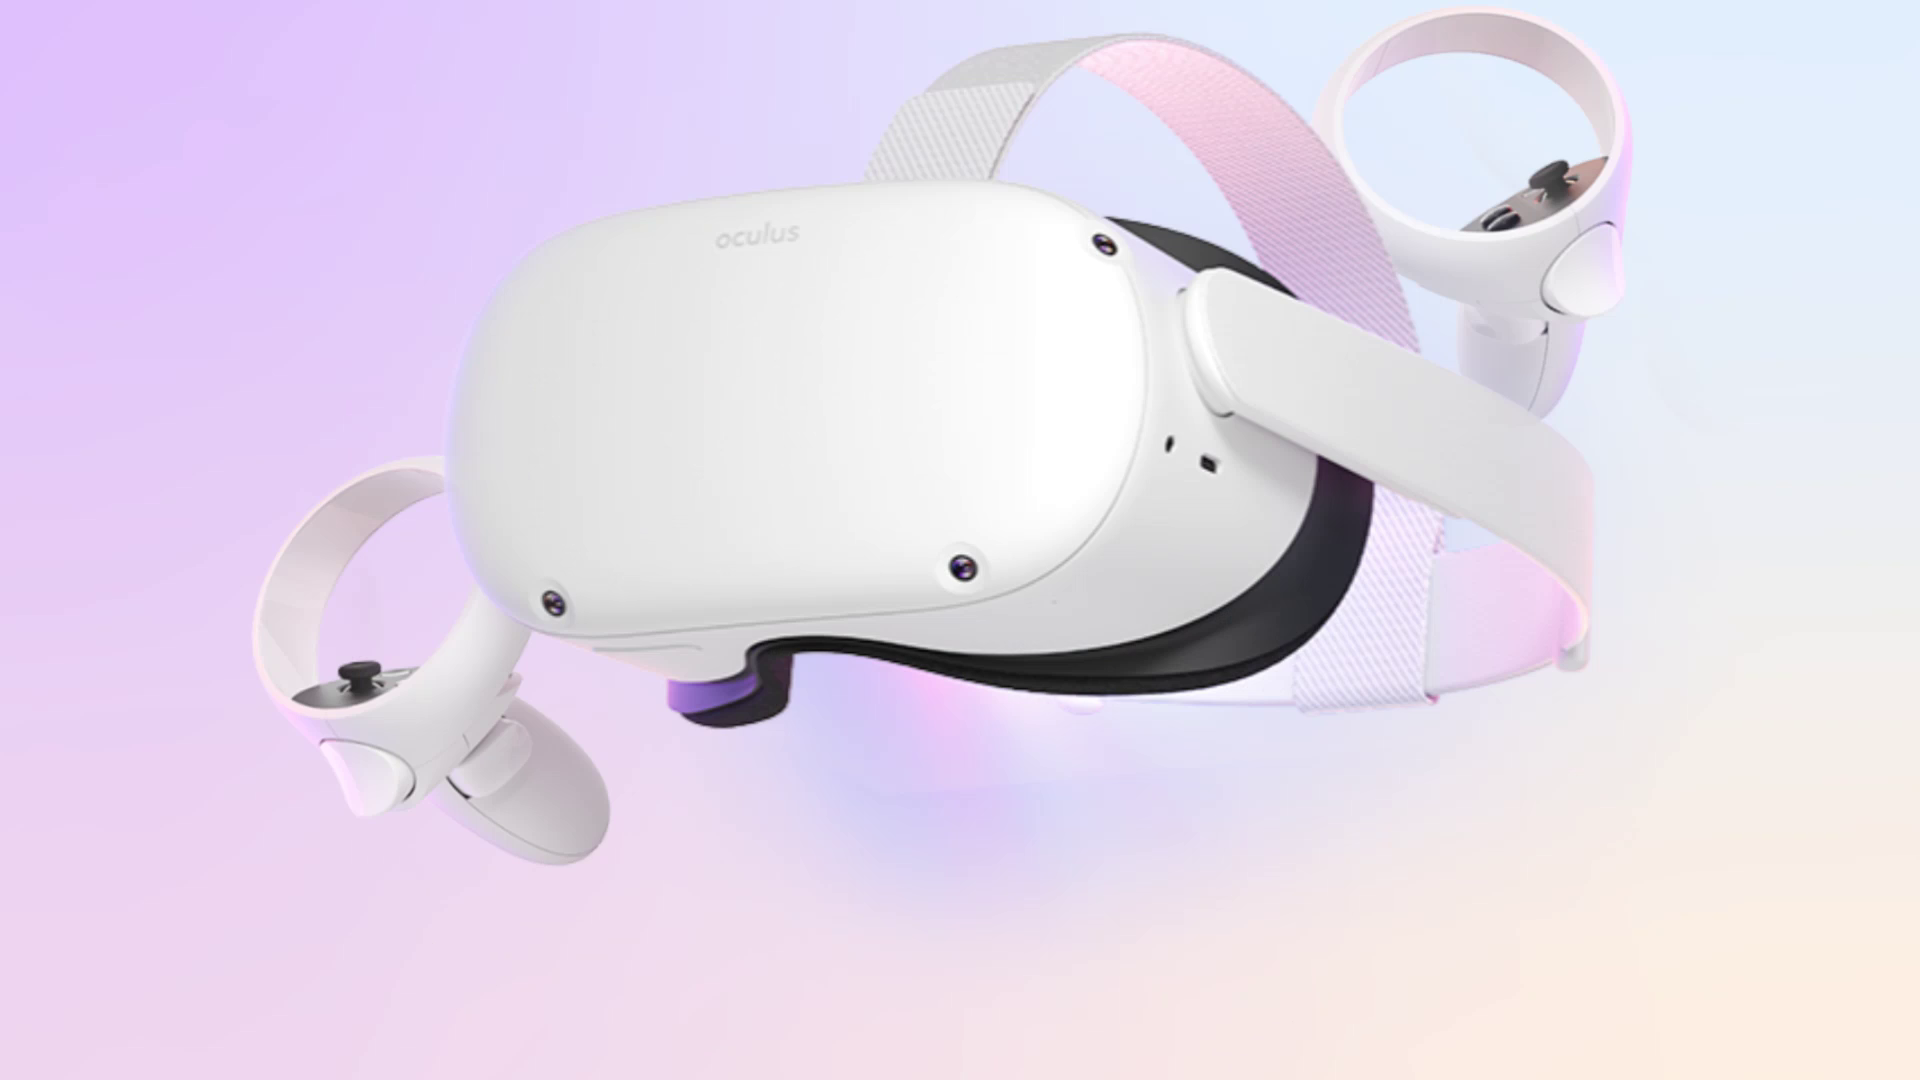 Oculus Quest 2 and controllers on lilac backdrop